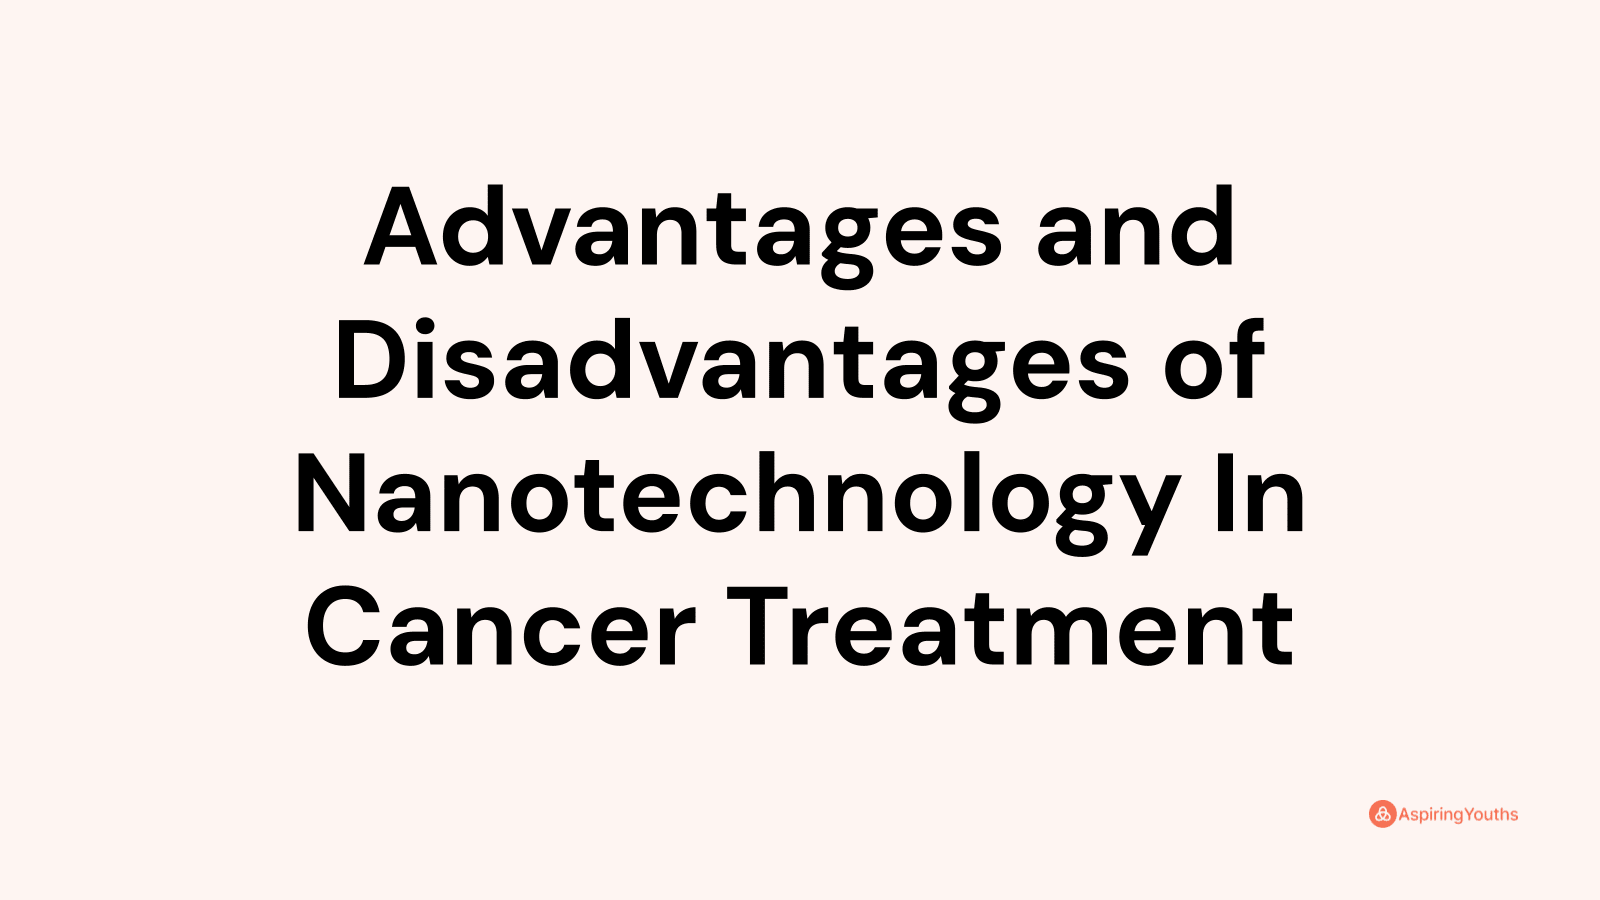 Advantages and disadvantages of Nanotechnology In Cancer Treatment